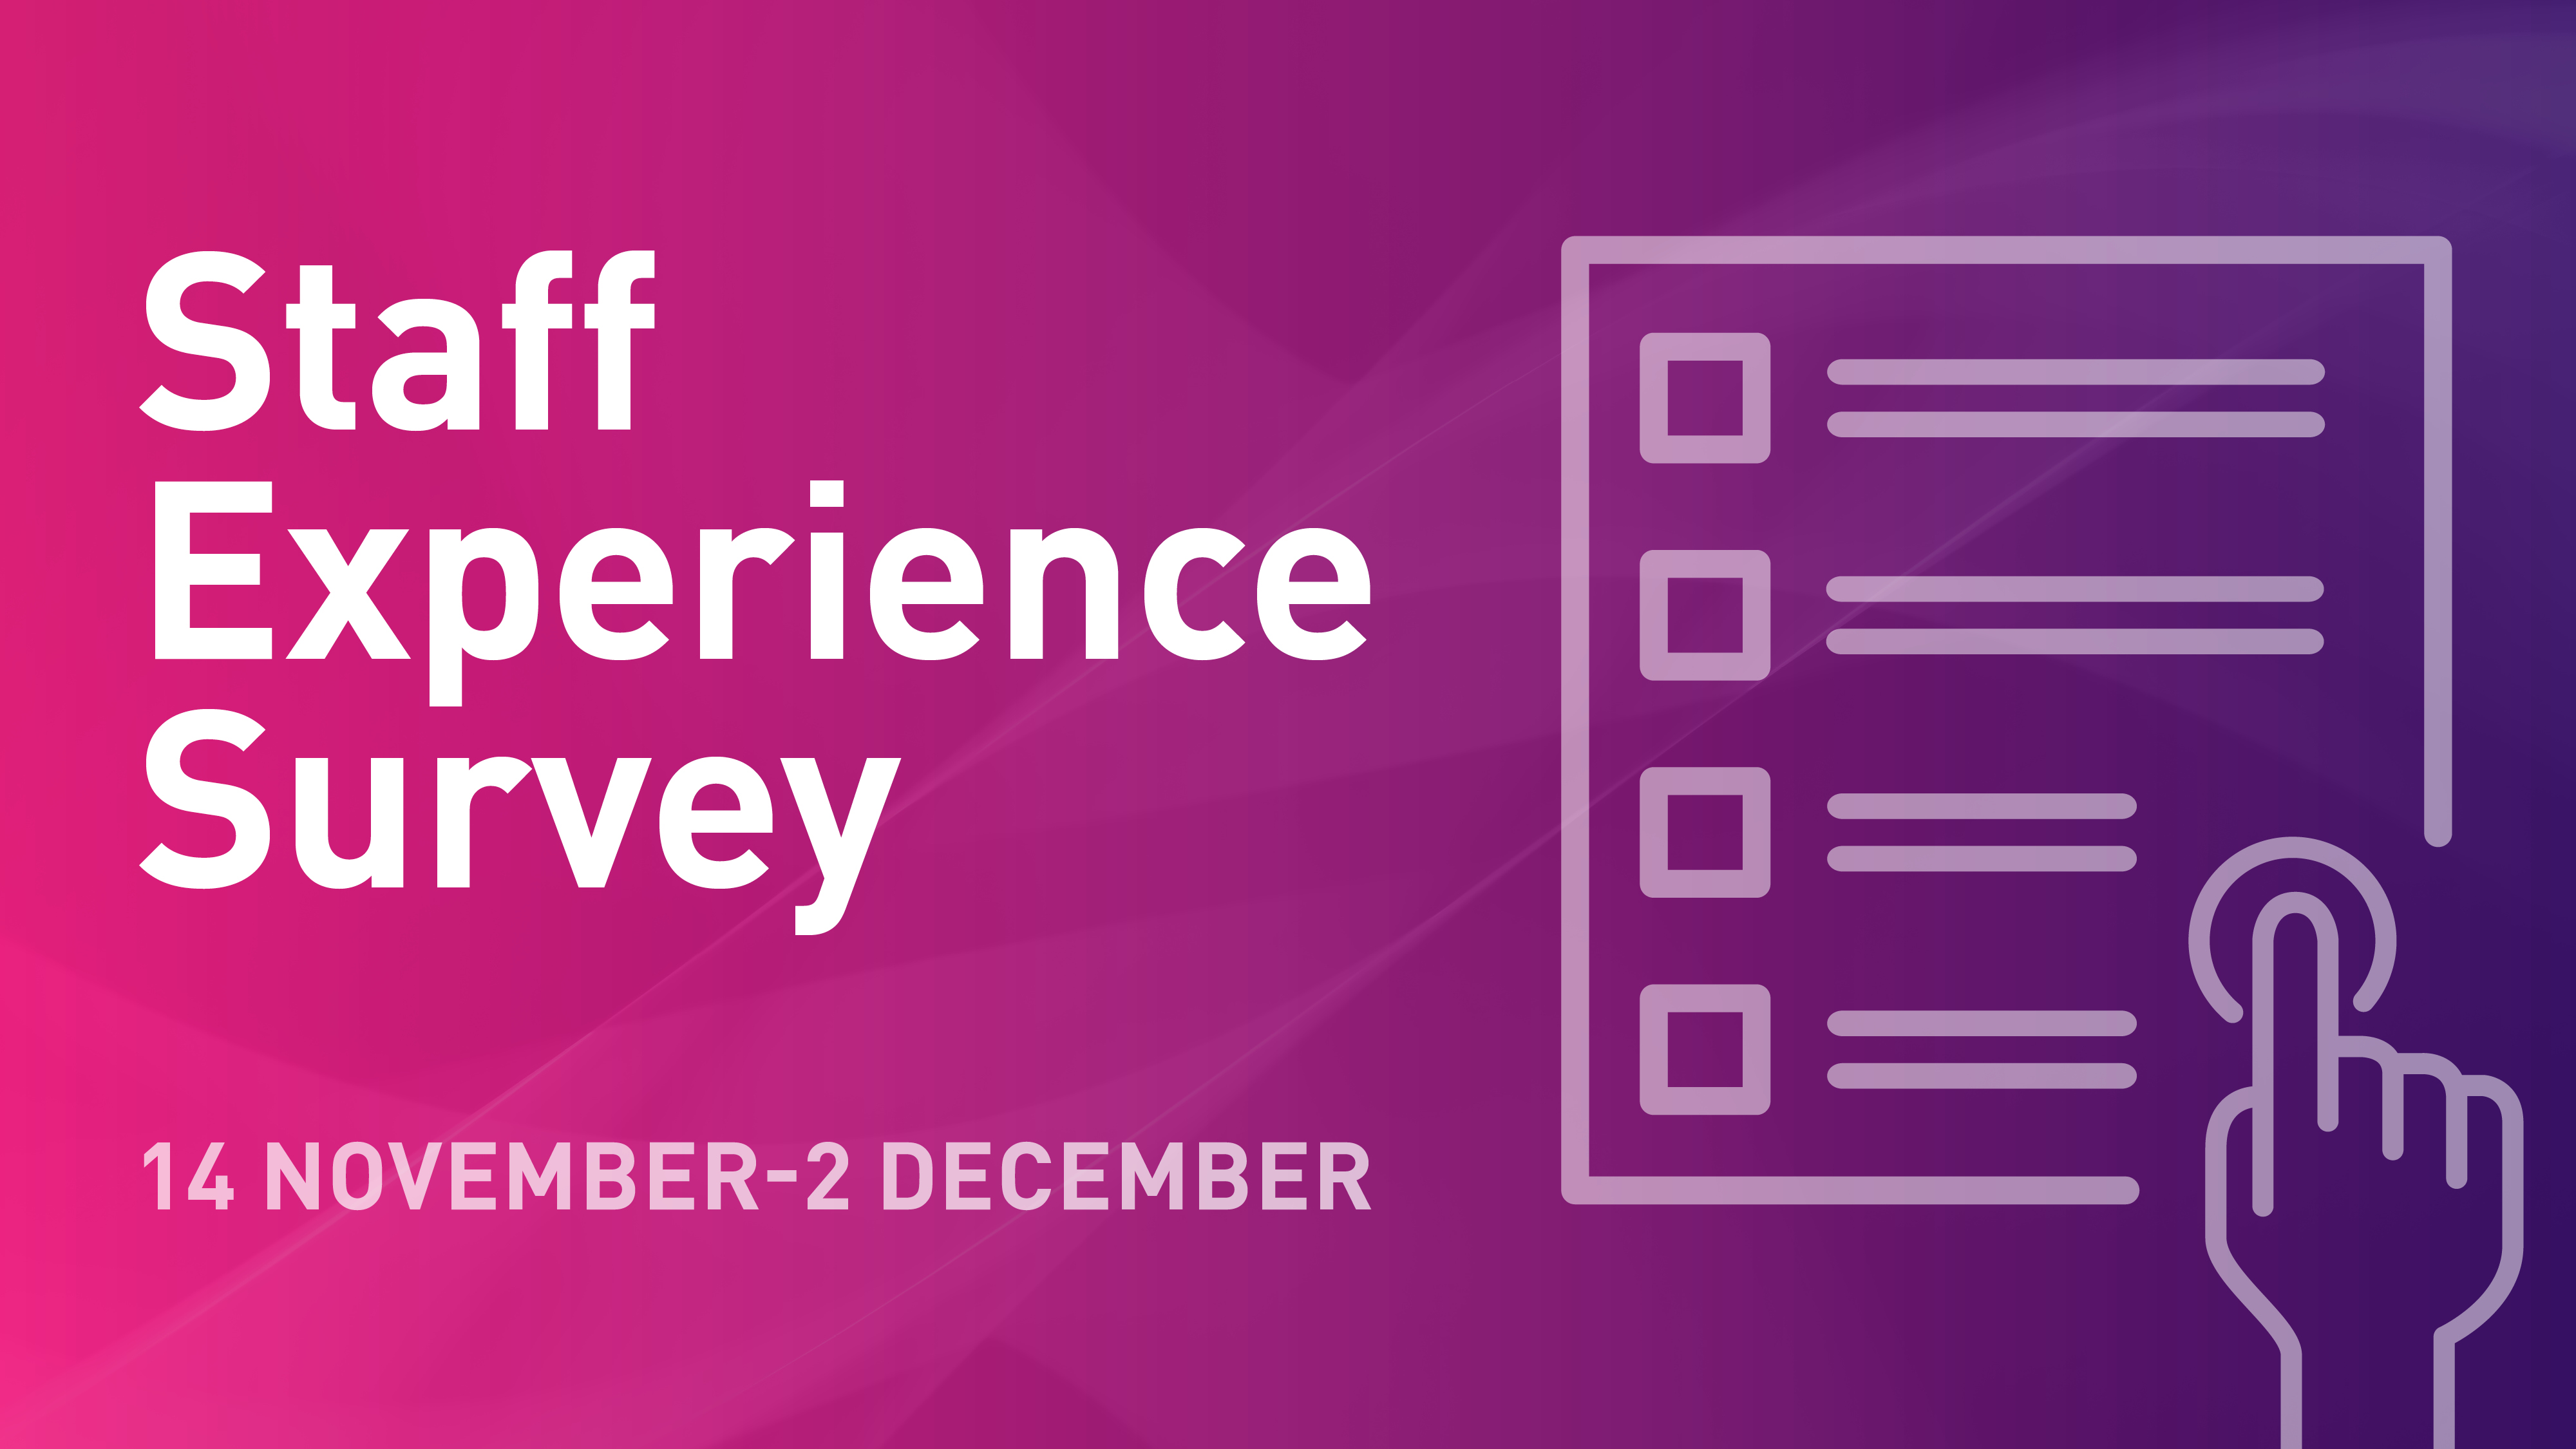 Purple and pink banner with 'Staff Experience Survey' written on it and a graphic of a hand filling out a survey 